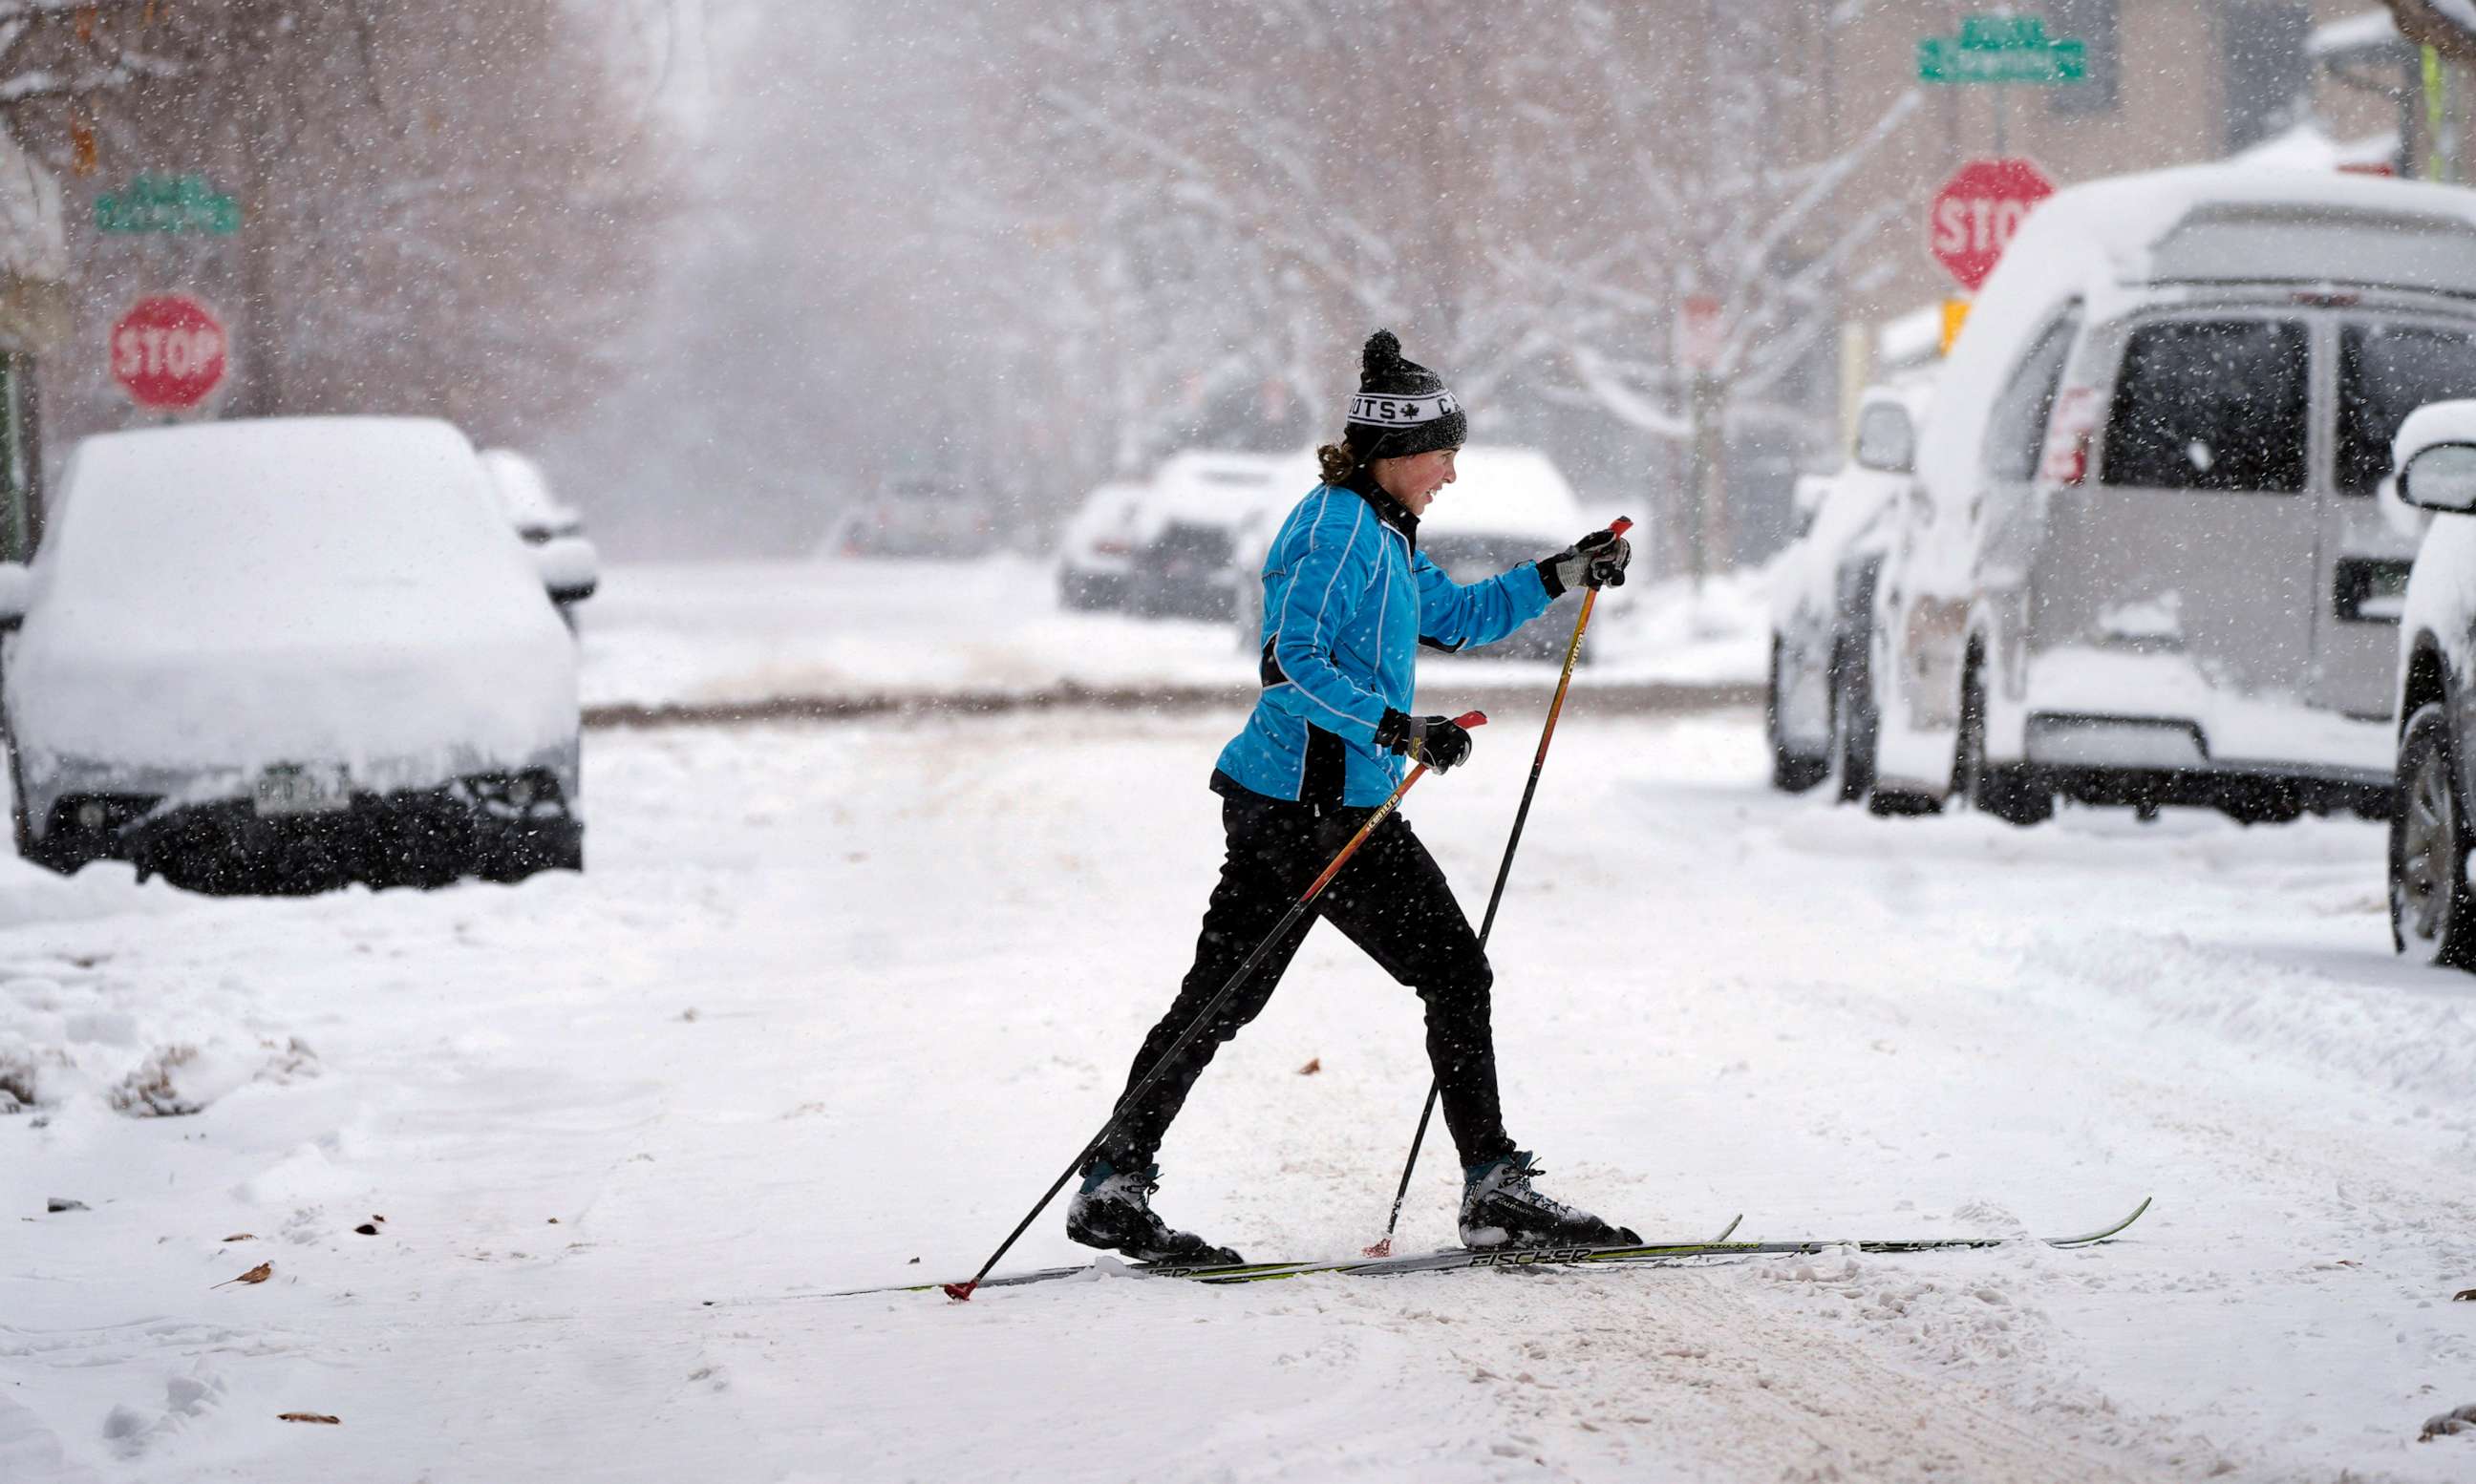 PHOTO: A cross-country skier navigates the street after a winter storm packing heavy snow enveloped the intermountain West, Jan. 18, 2023, in Denver.